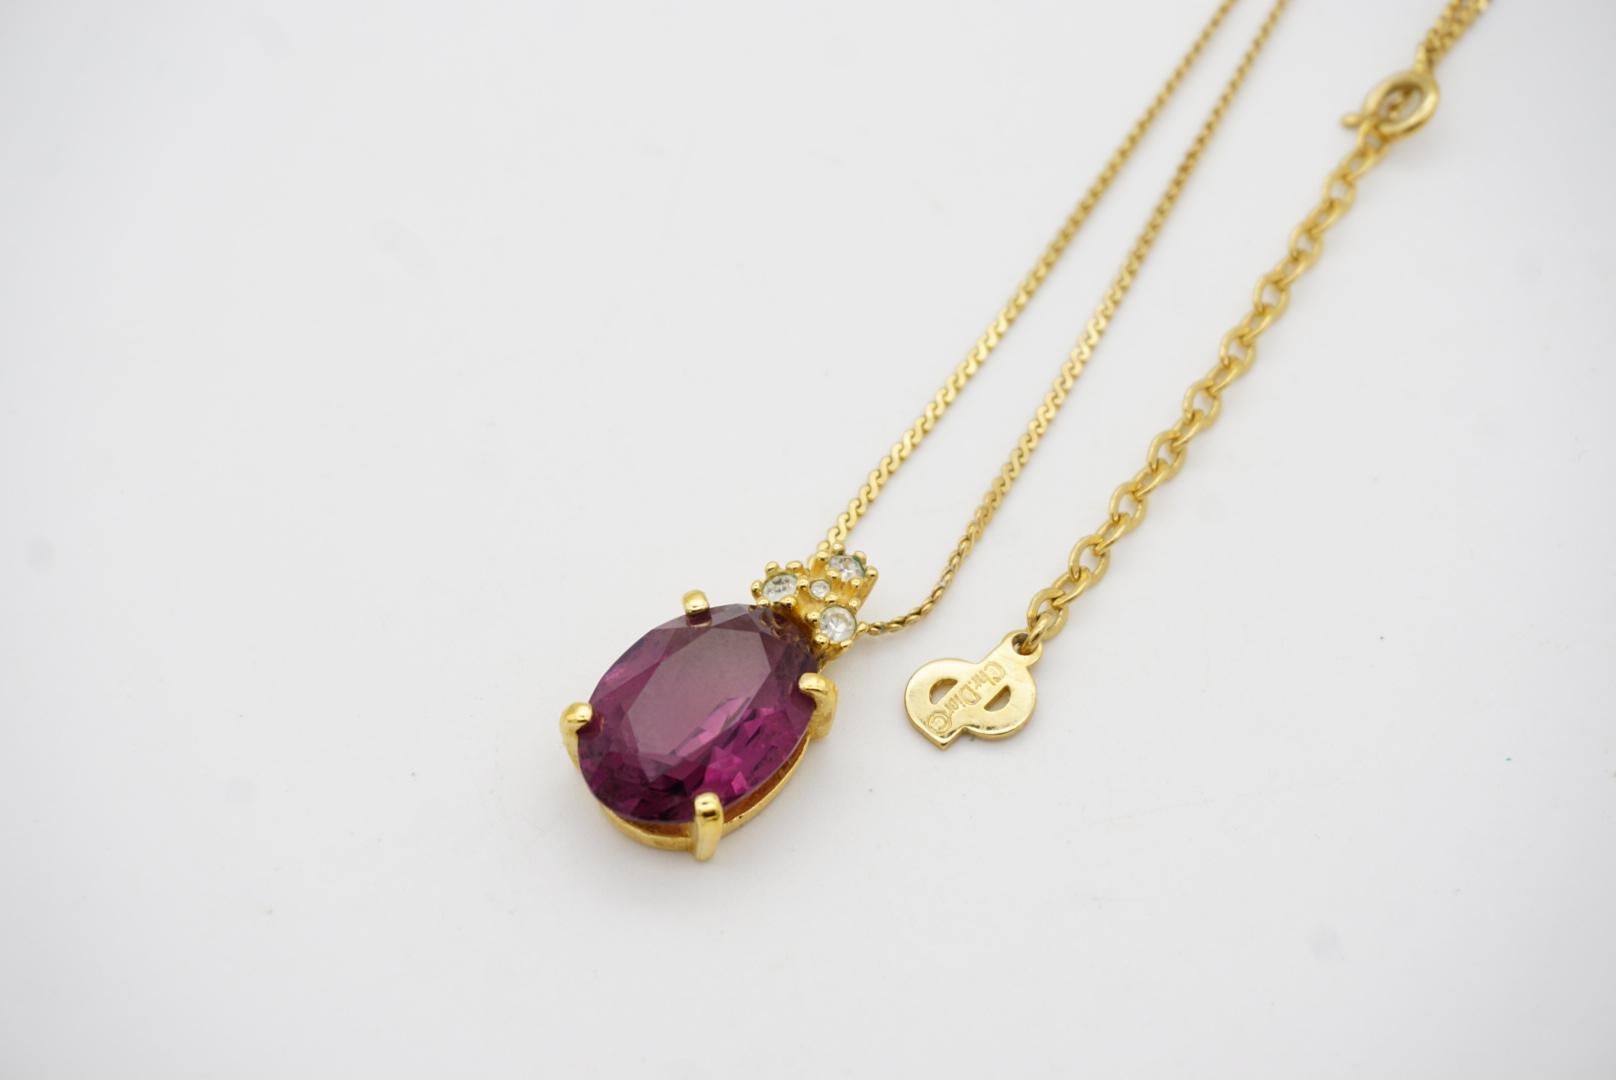 Christian Dior Vintage 1980s Amethyst Purple Oval Crystals Gold Pendant Necklace For Sale 5